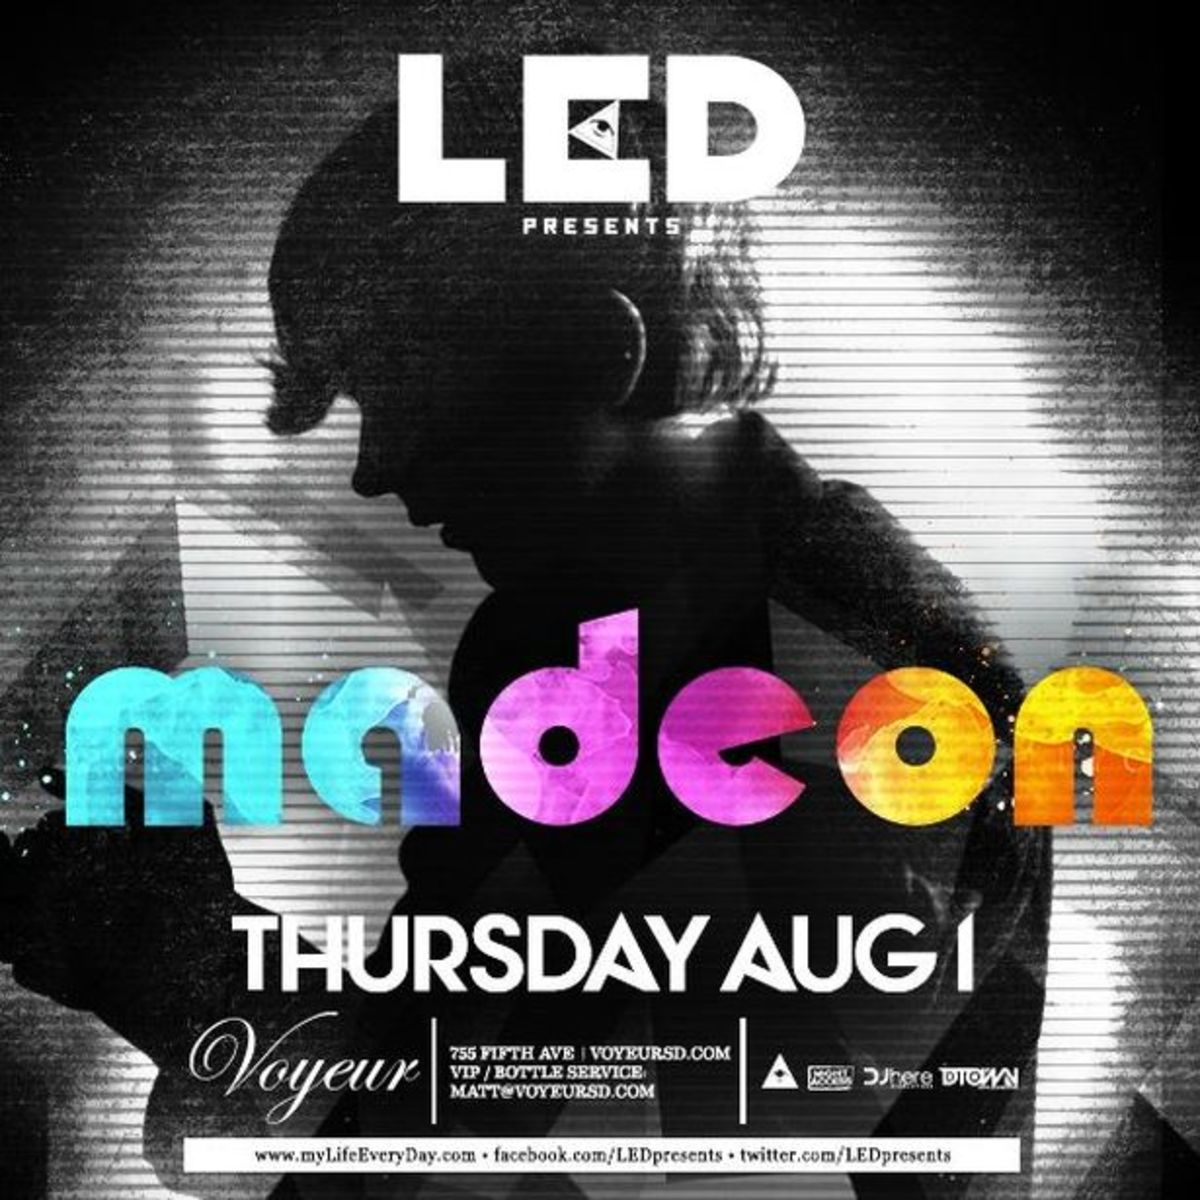 EDM Culture - San Diego Events August 1st through the 4th- Madeon at Voyeur, Adult Swim Saturdays with Gabriel & Dresden and Get Wet with Krewella